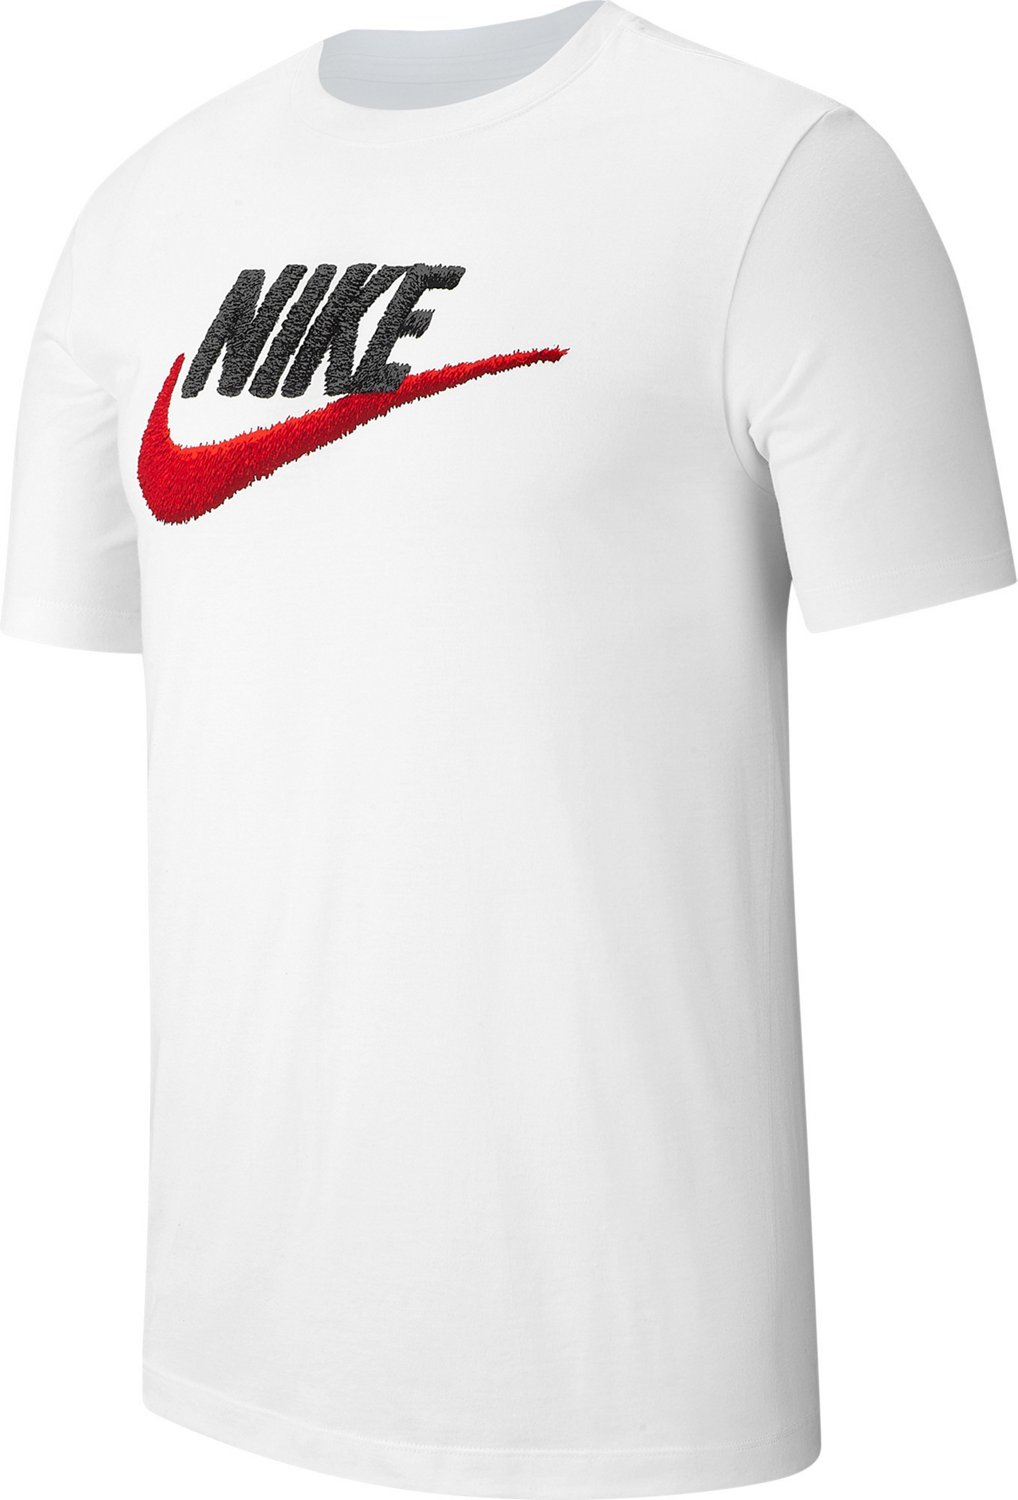 black red and blue nike shirt